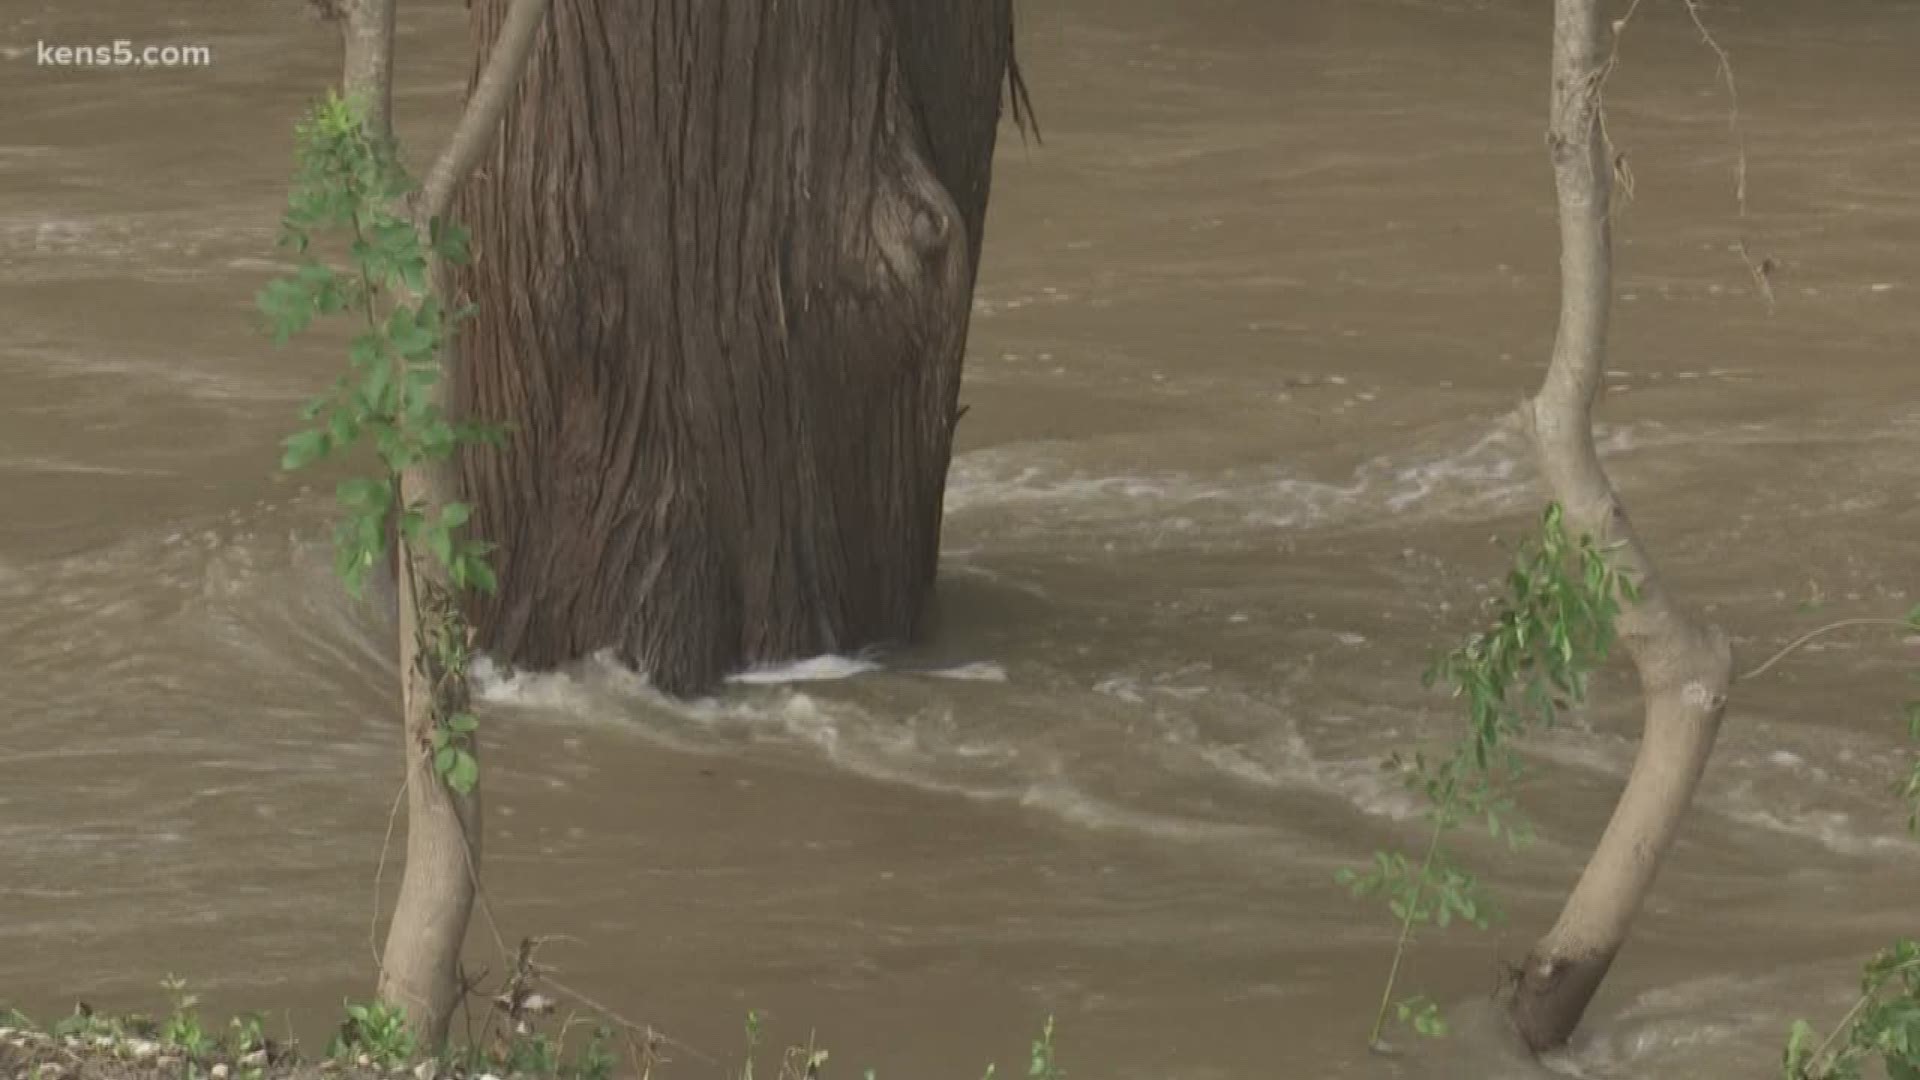 Heavy rain caused major flooding in Medina County this weekend.